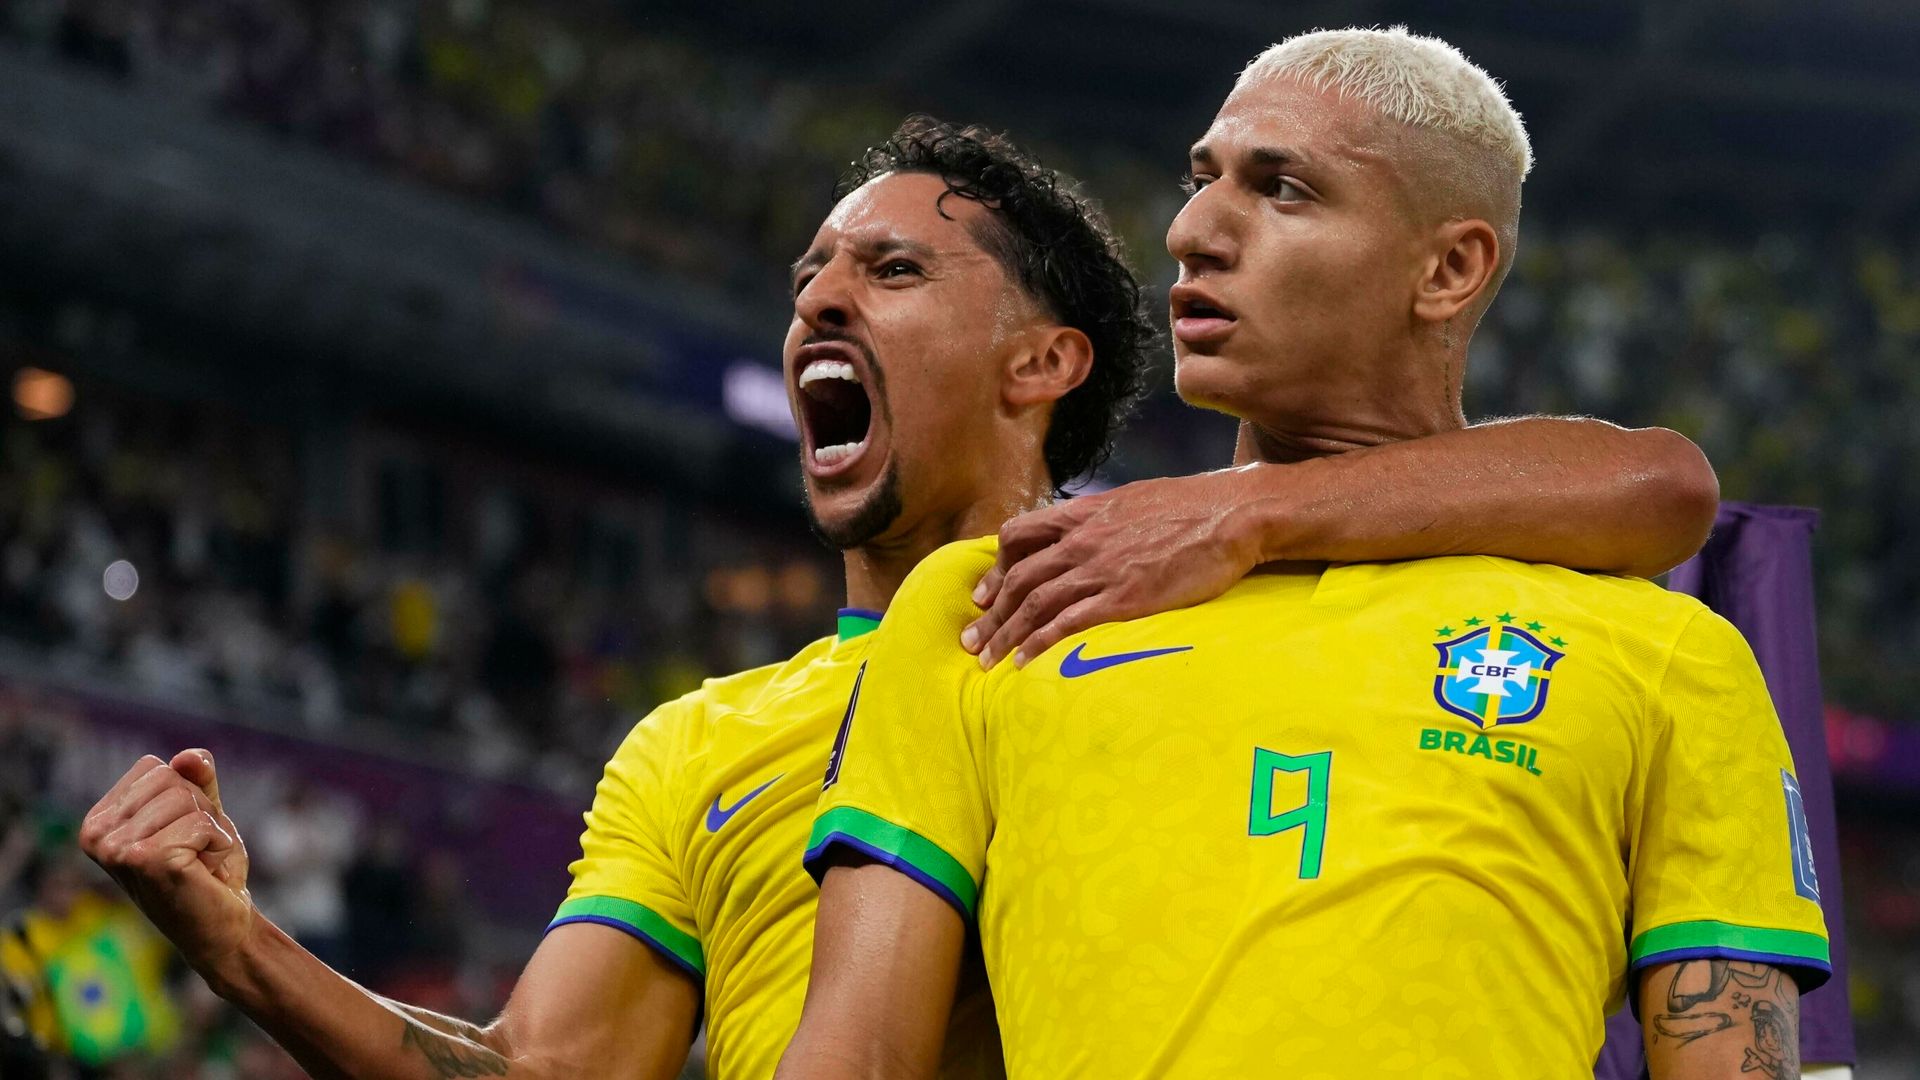 World Cup hits and misses: Brazil turn on the style; Croatia go distance - again